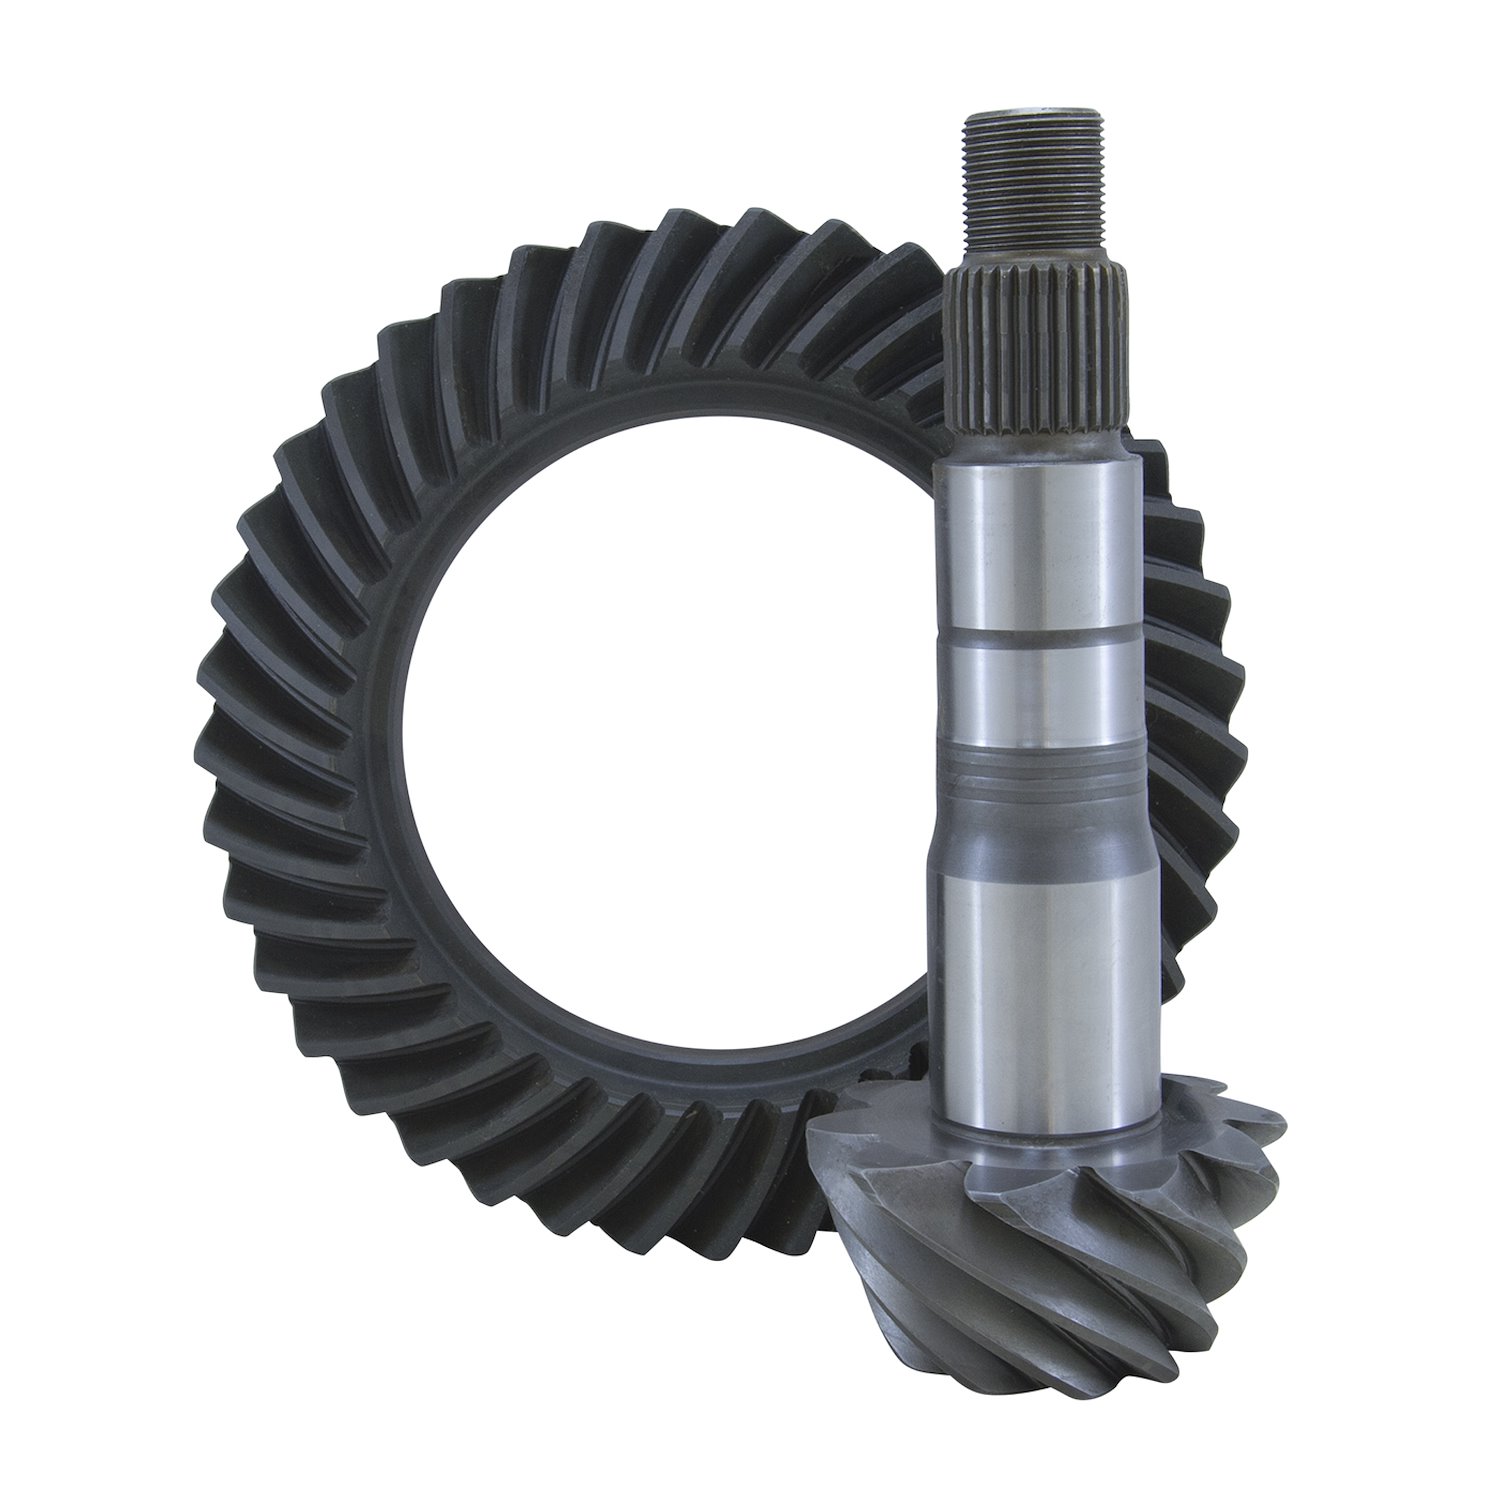 USA Standard ZG T100-488 Ring & Pinion Gear Set, For Toyota T100 And Tacoma, 4.88 Ratio